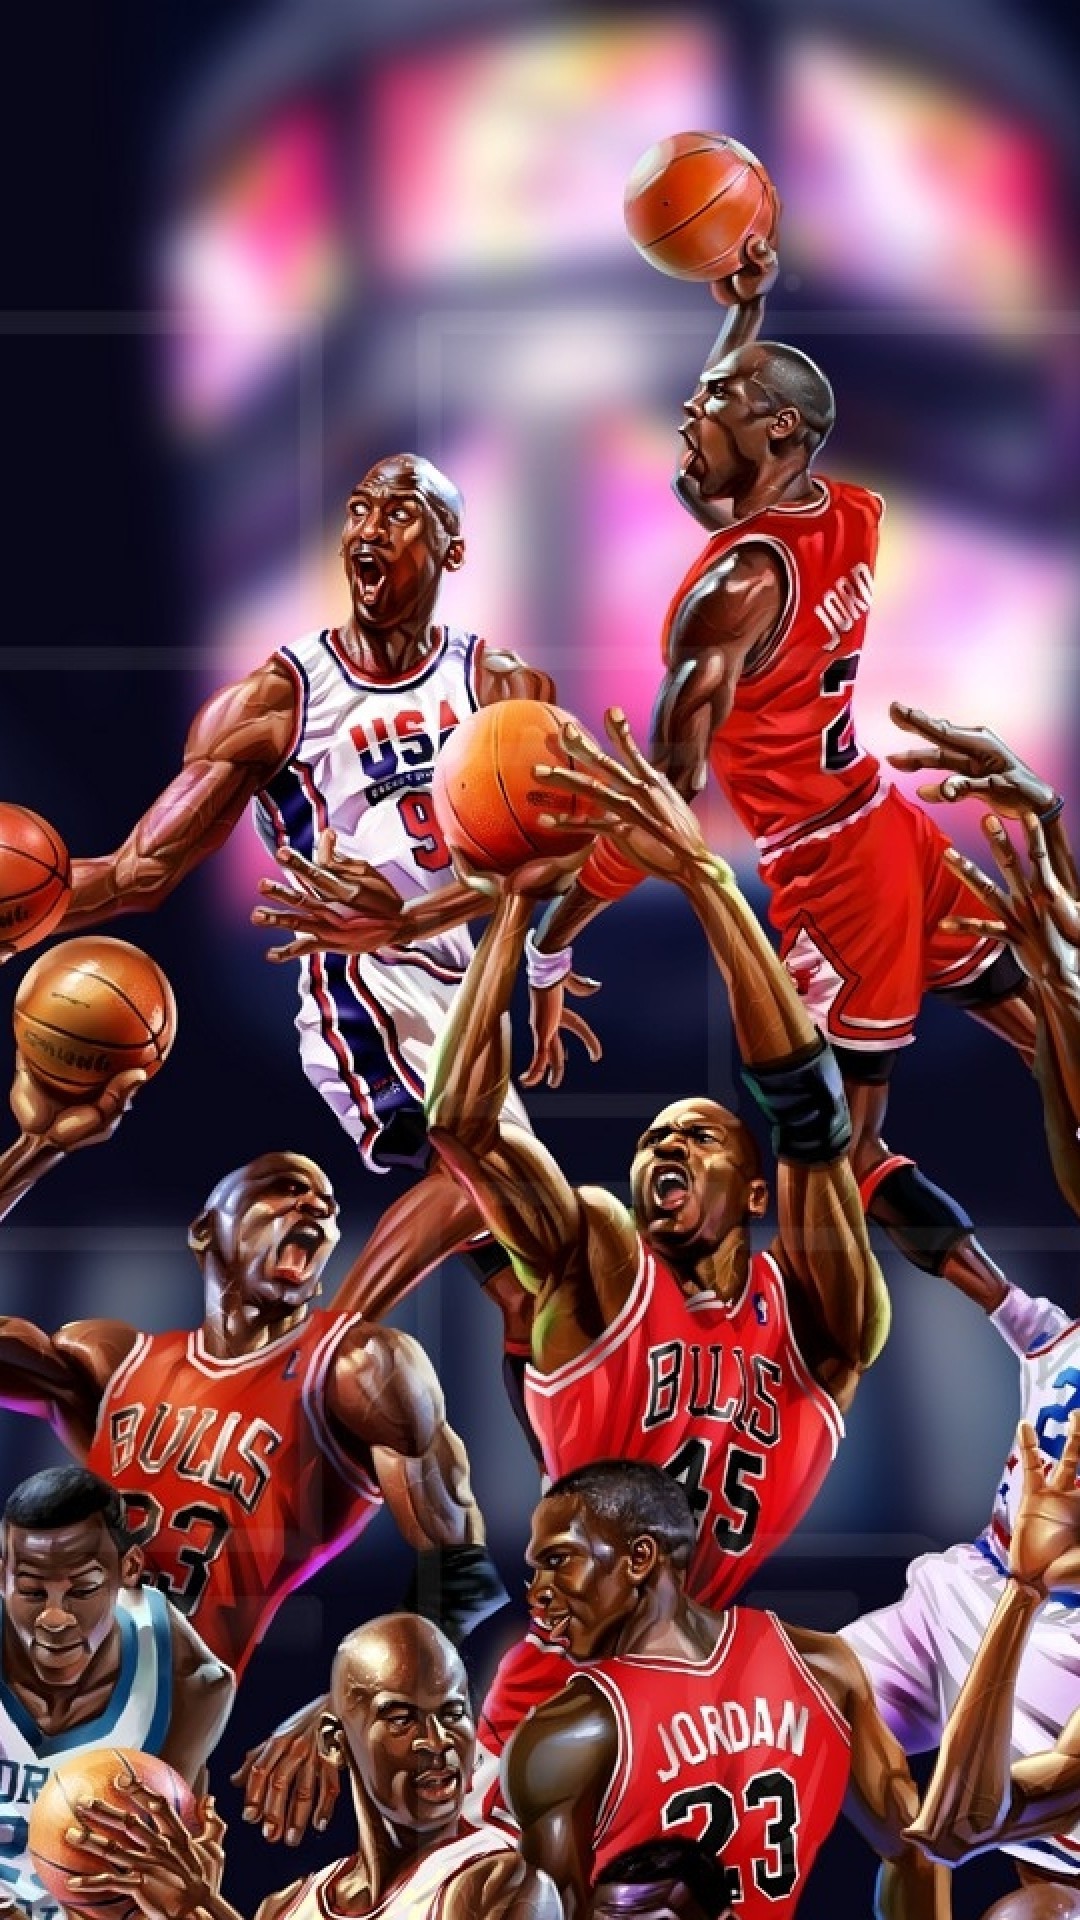 NBA iPhone Wallpapers HD (69+ images)